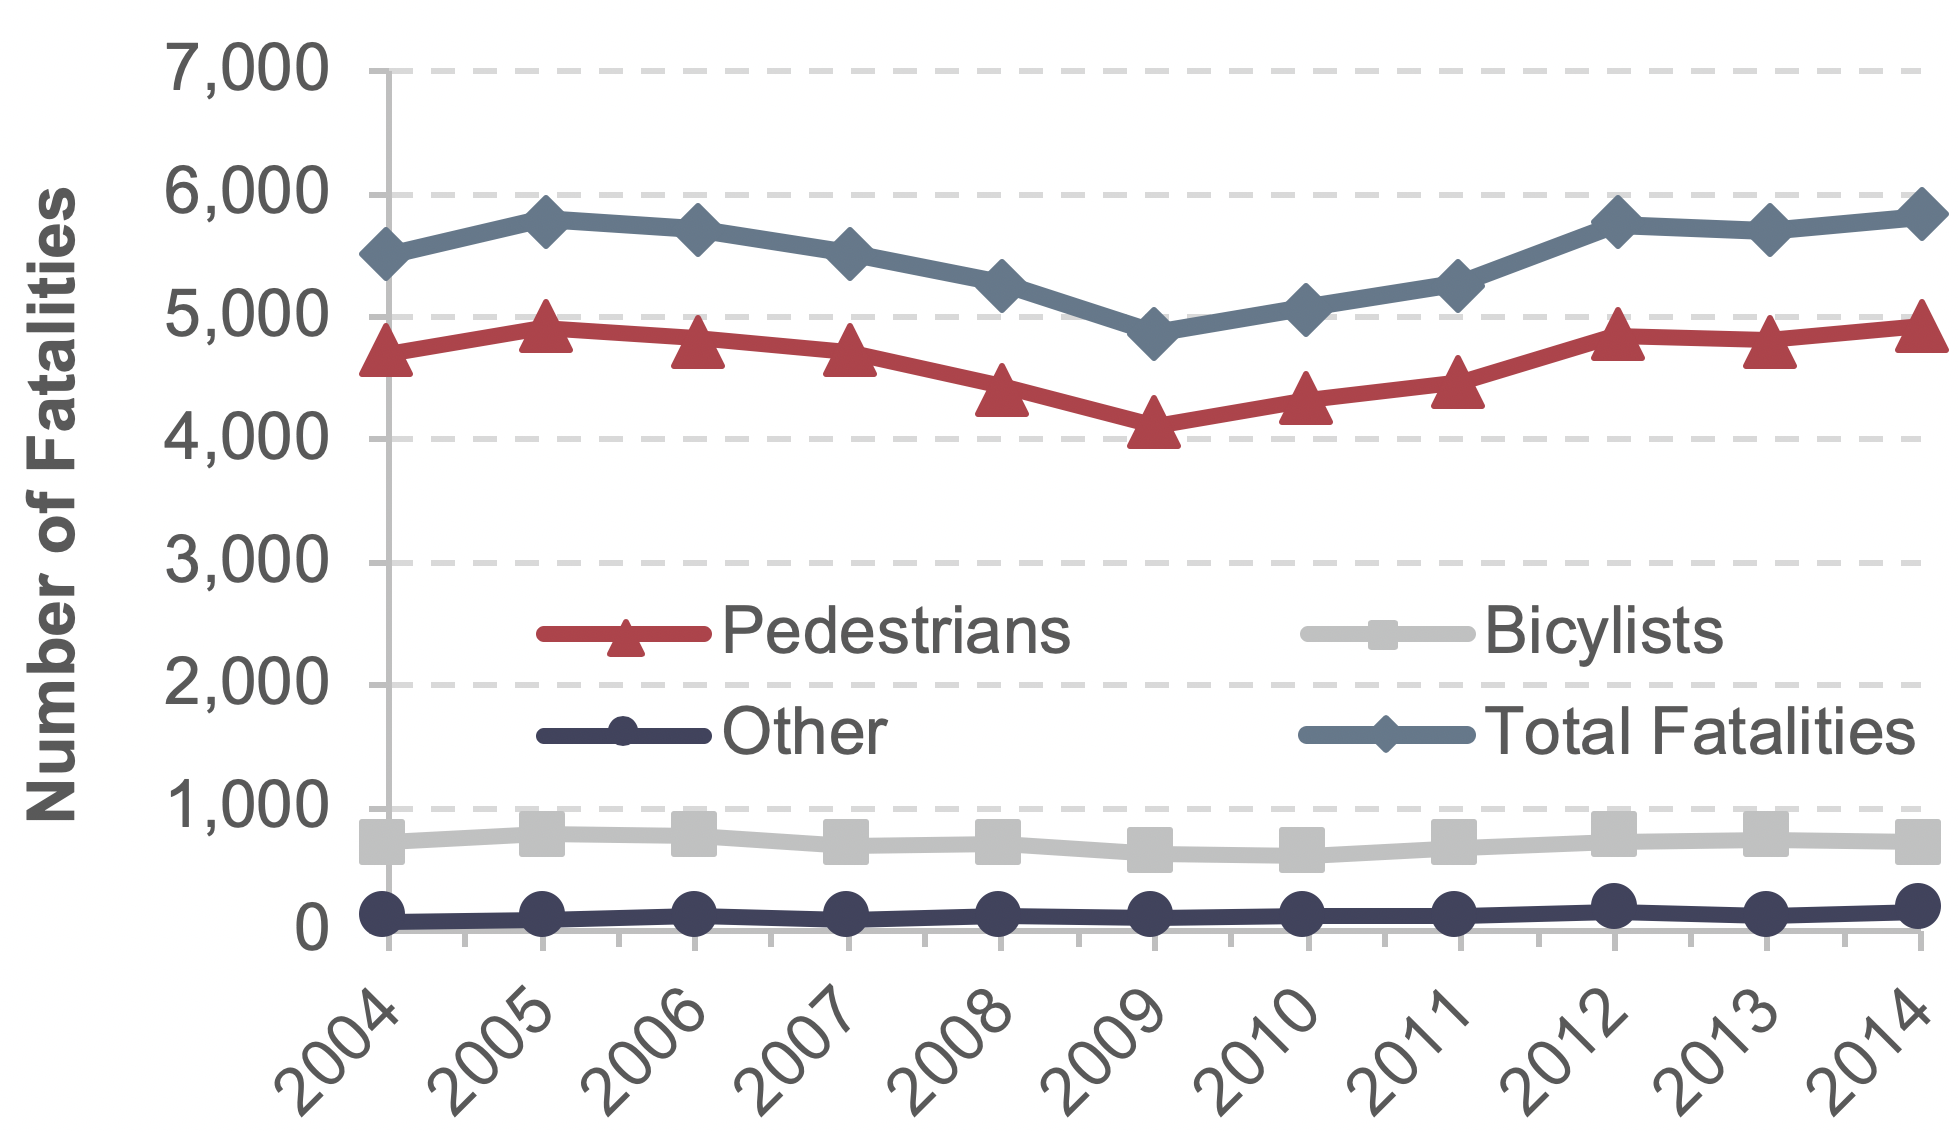 A stacked line graph is presented showing the number of fatalities between 2004 and 2014, organized by Pedestrians, Bicyclists, Other, and the total. Bicyclists and Other start at 721 and 85 respectively in 2004 and remain relatively stable over the time series. The majority of fatalities is contributed by pedestrians and the total is well locked to this trend. Pedestrians accounted for 4,703 fatalities in 2004. An increasing trend is found between 2004 and 2005 before decreasing from 2005 to a minimum in 2009 of 4,120. Since 2009 an increasing trend has been observed, resulting in 4,925 fatalities in 2014. Source: Fatality Analysis Reporting System/National Center for Statistics and Analysis, NHTSA.